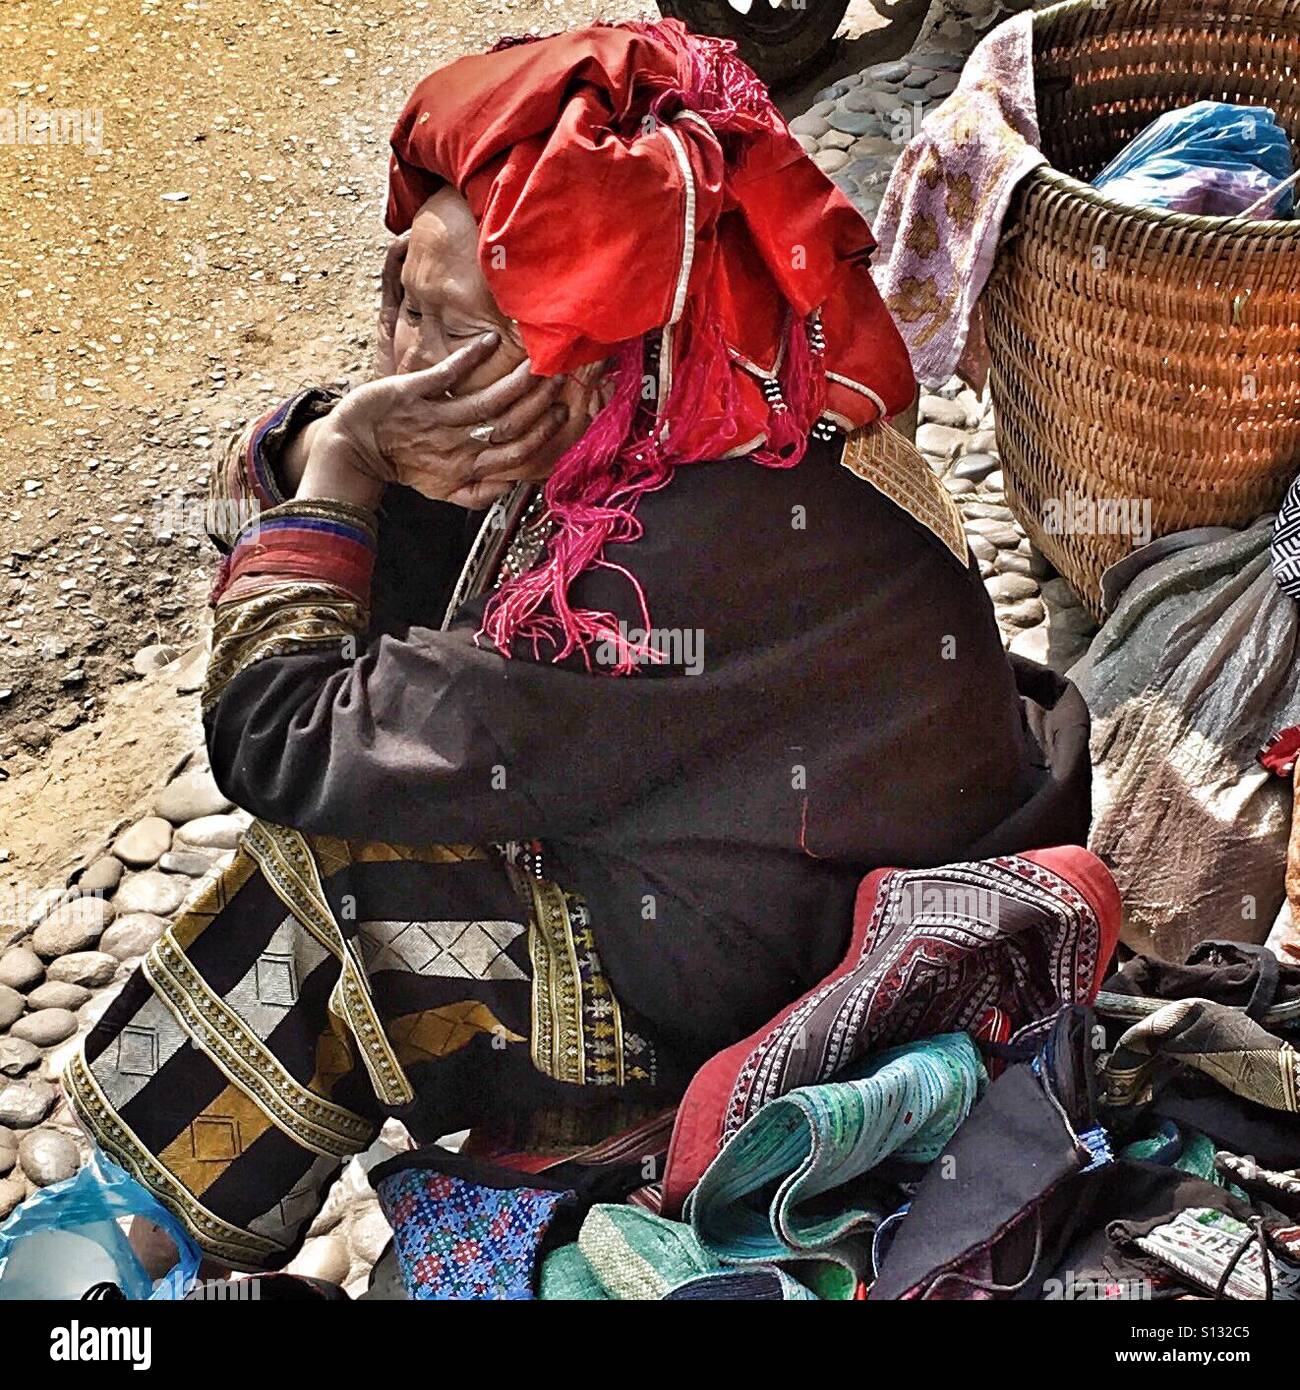 Red Dao woman selling her wares in Sapa Vietnam. Stock Photo